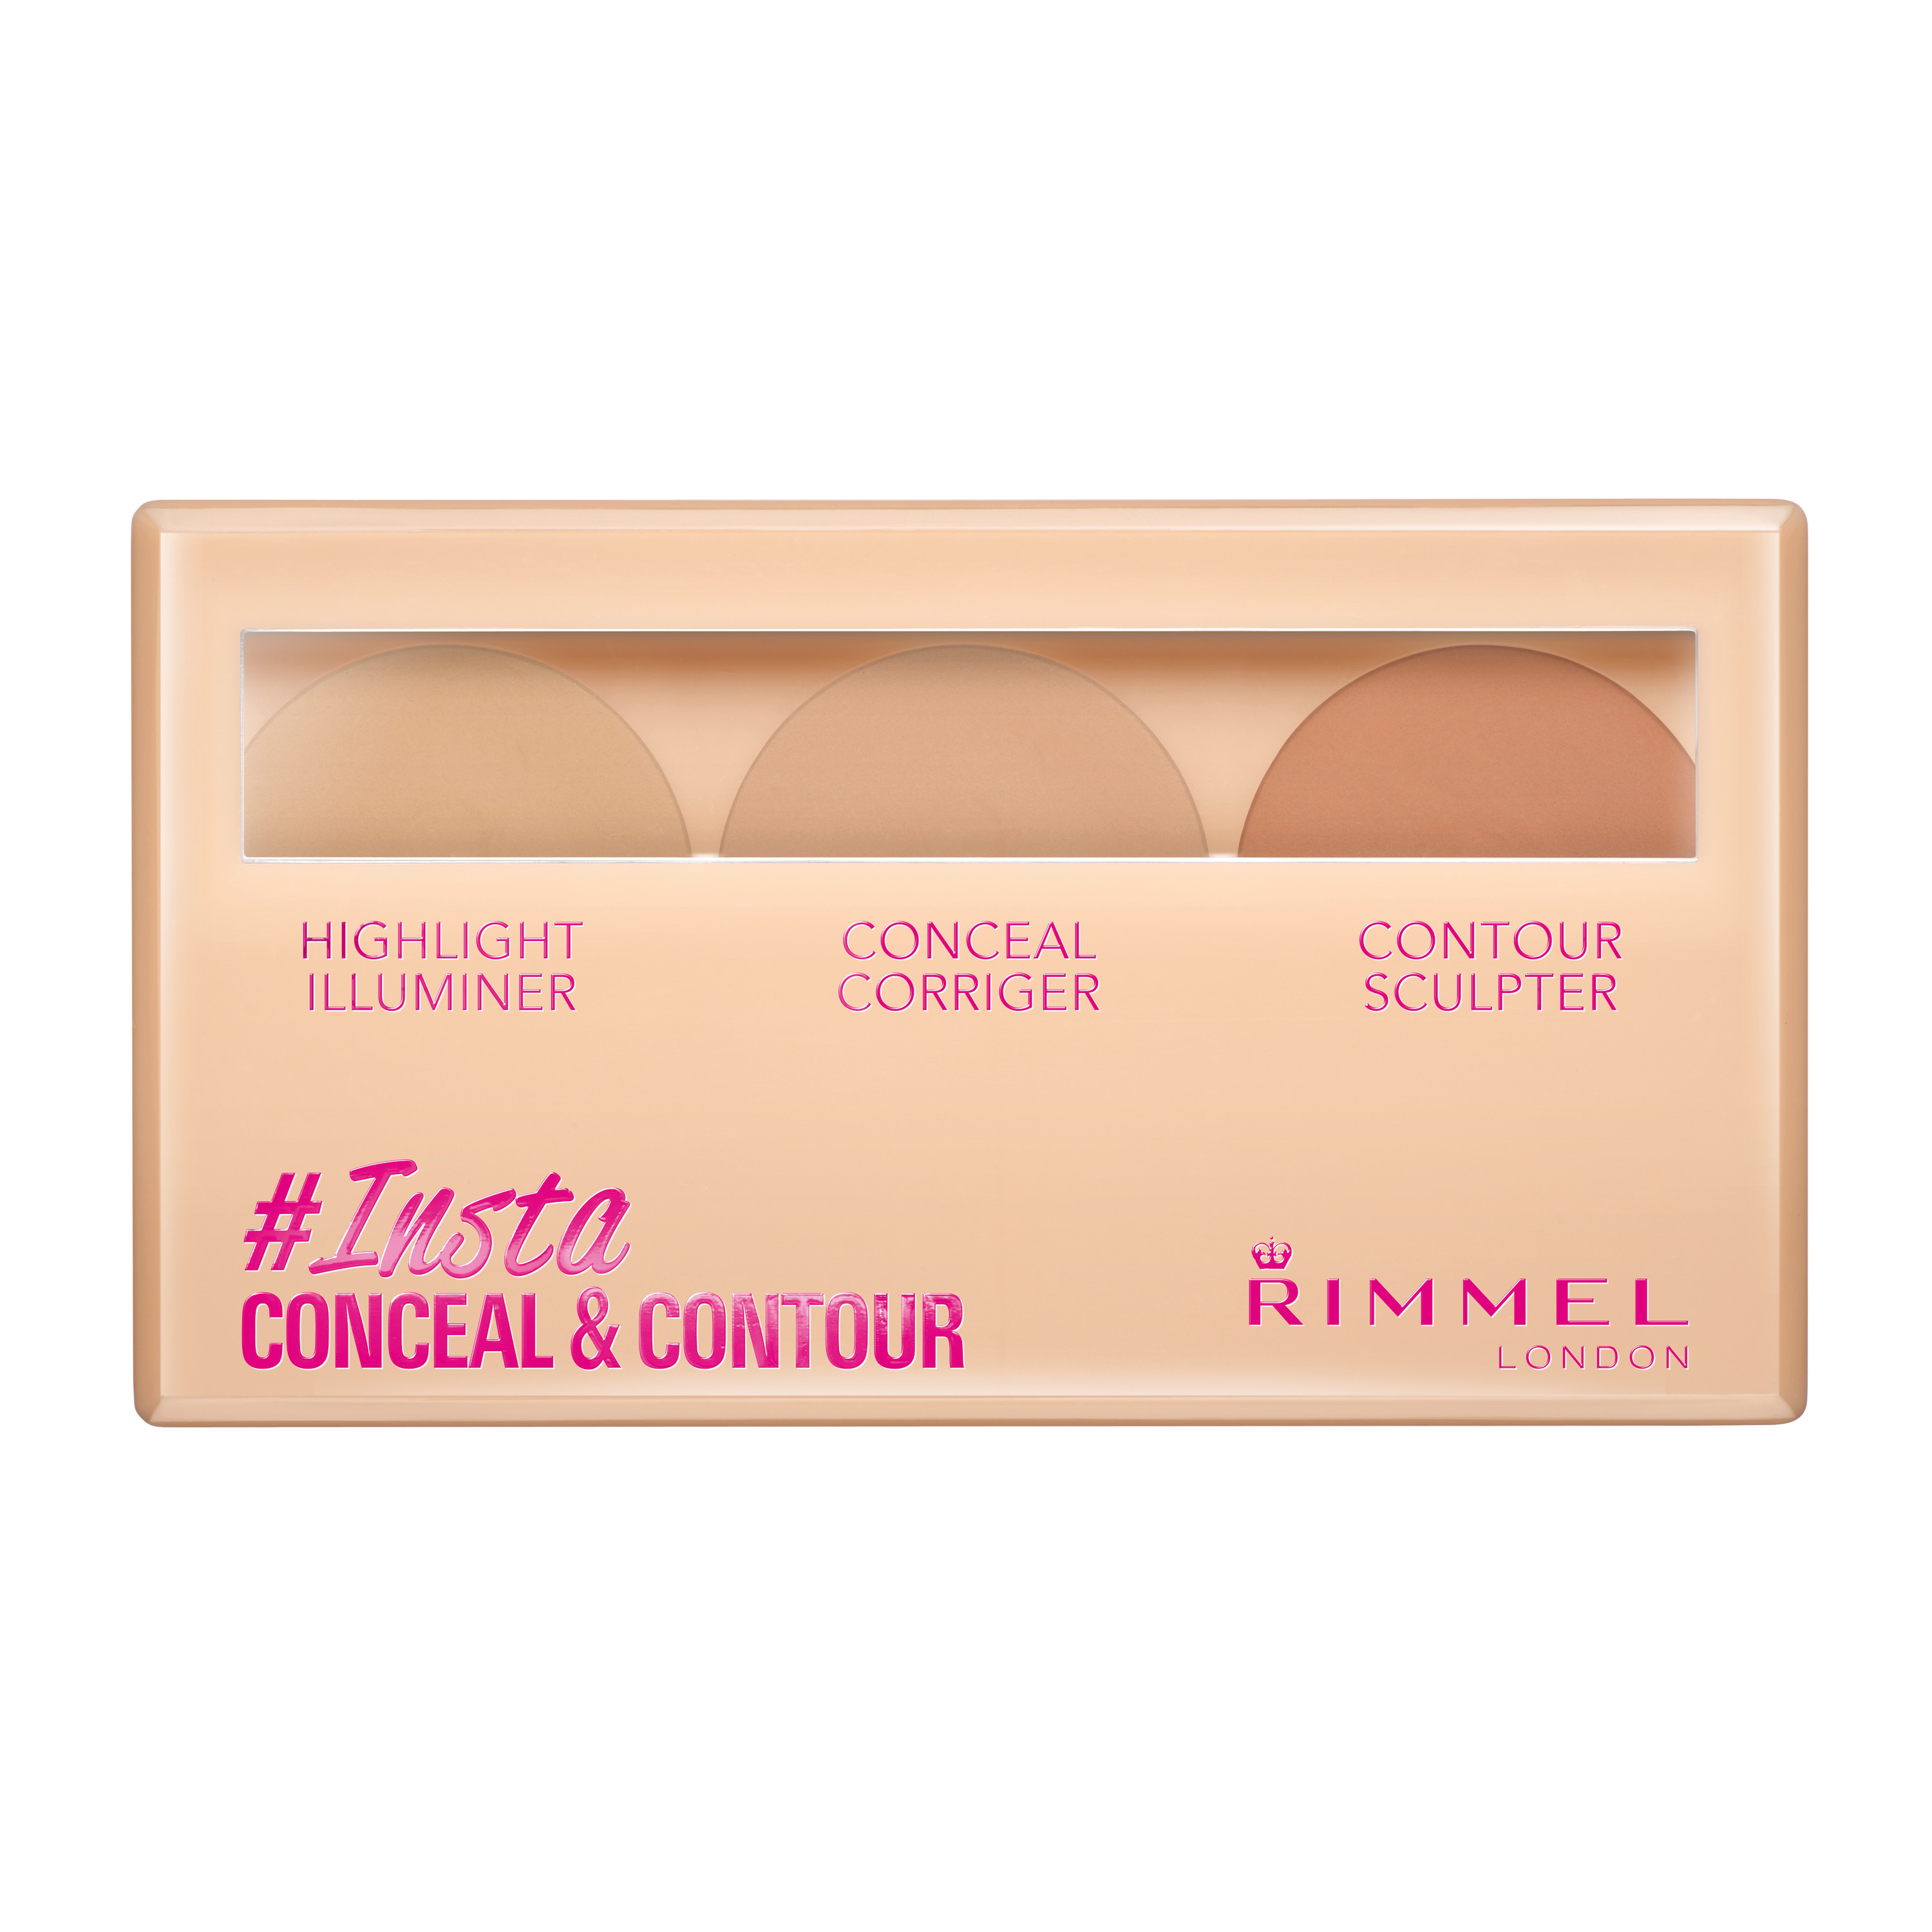 Rimmel Insta Conceal & Contour Palettes in 010 Light - image 1 of 5